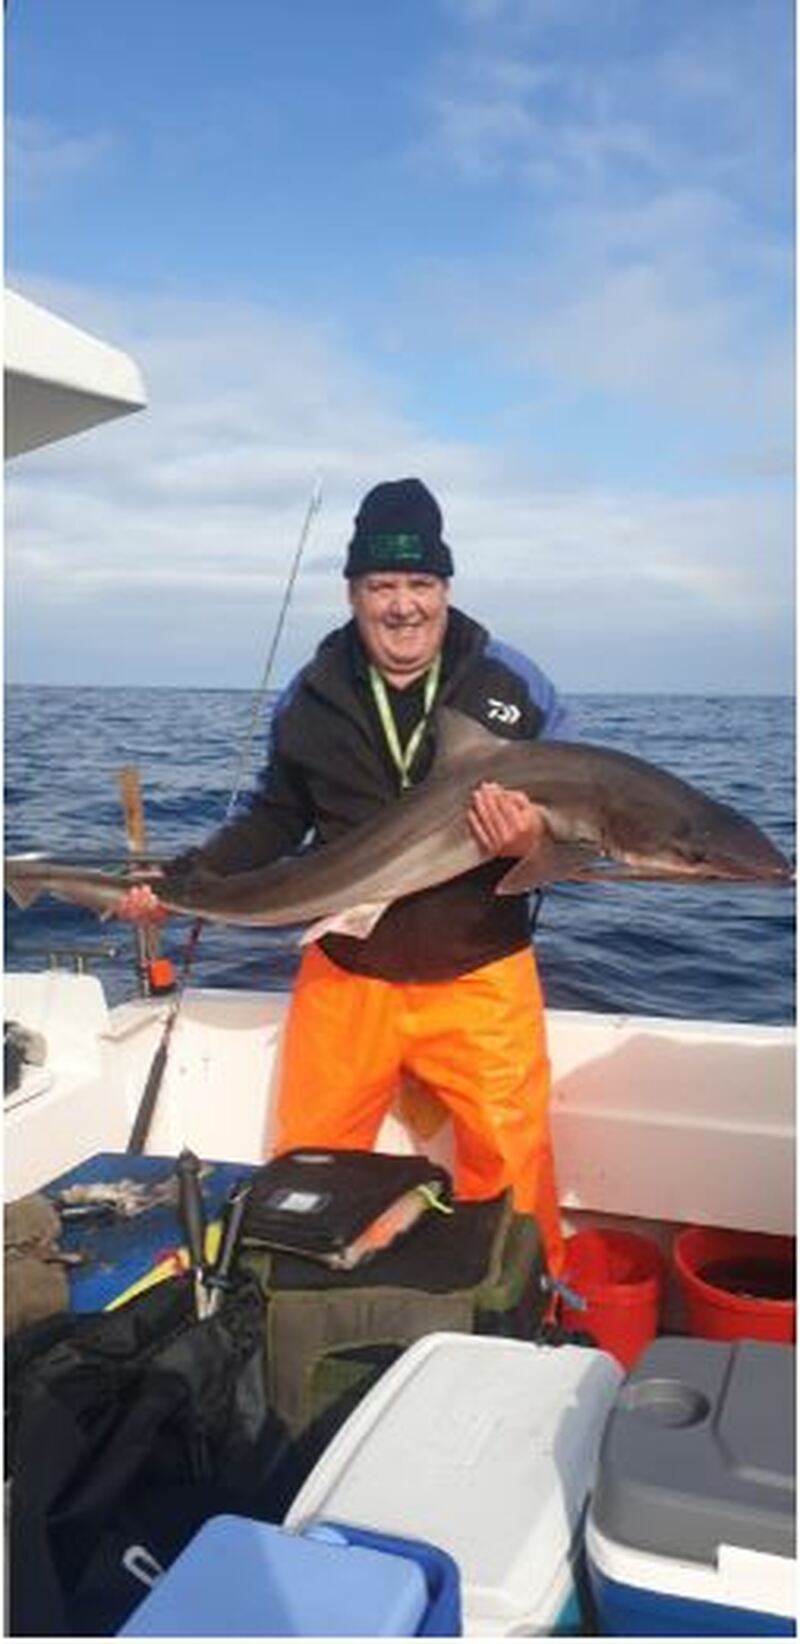 Steve Thornton with his captured tope shark.